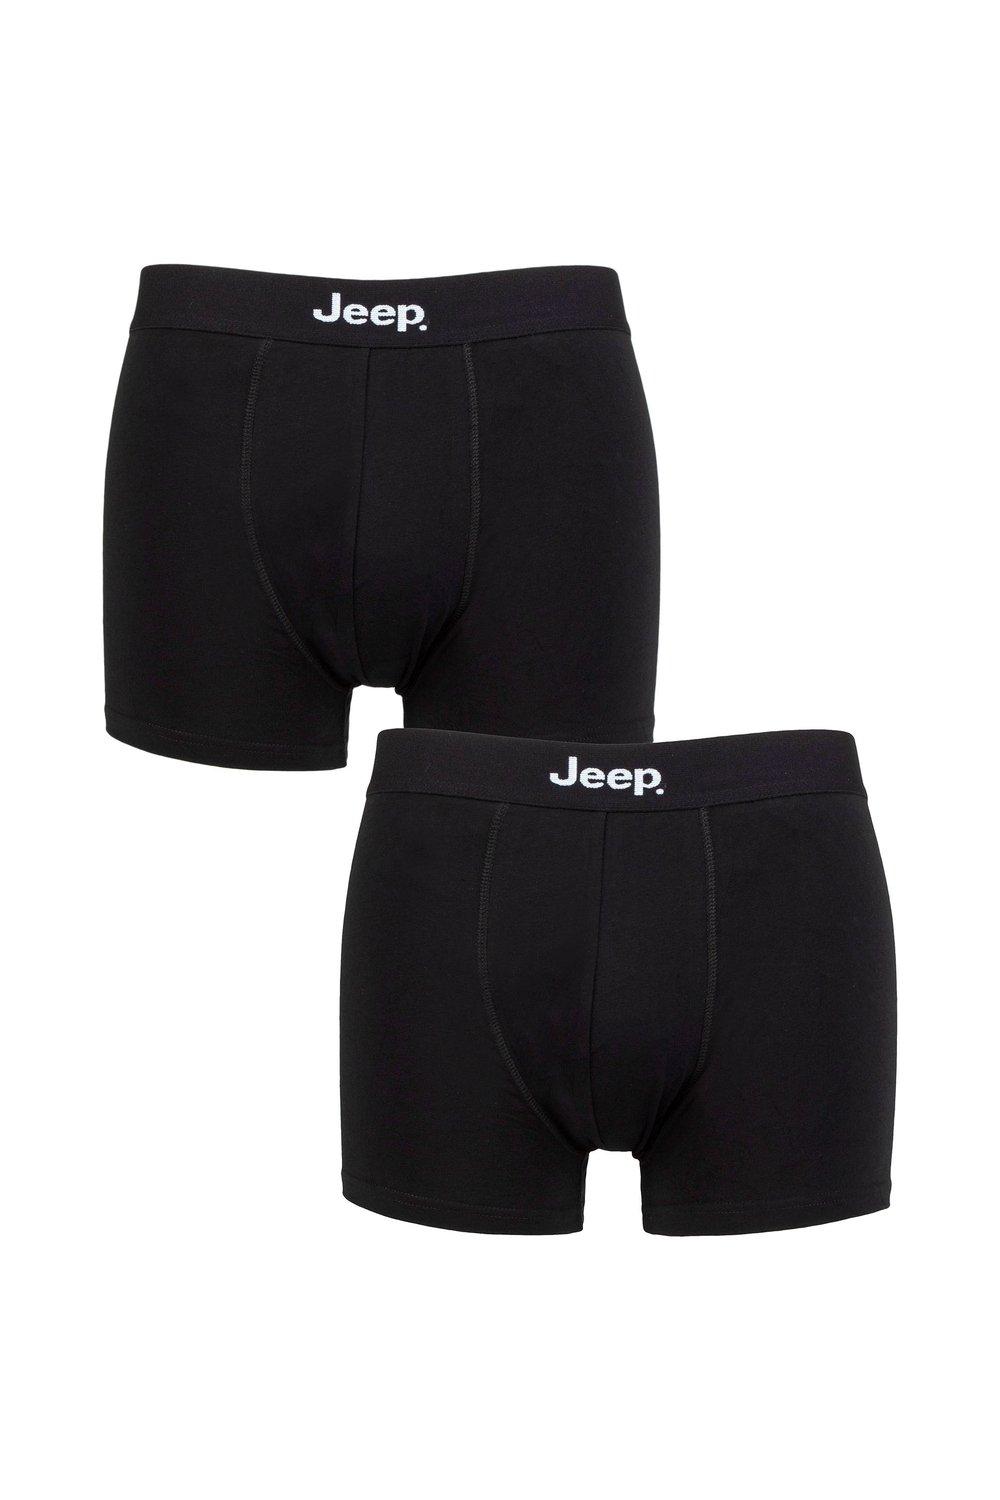 2 Pack Cotton Plain Fitted Hipster Trunks